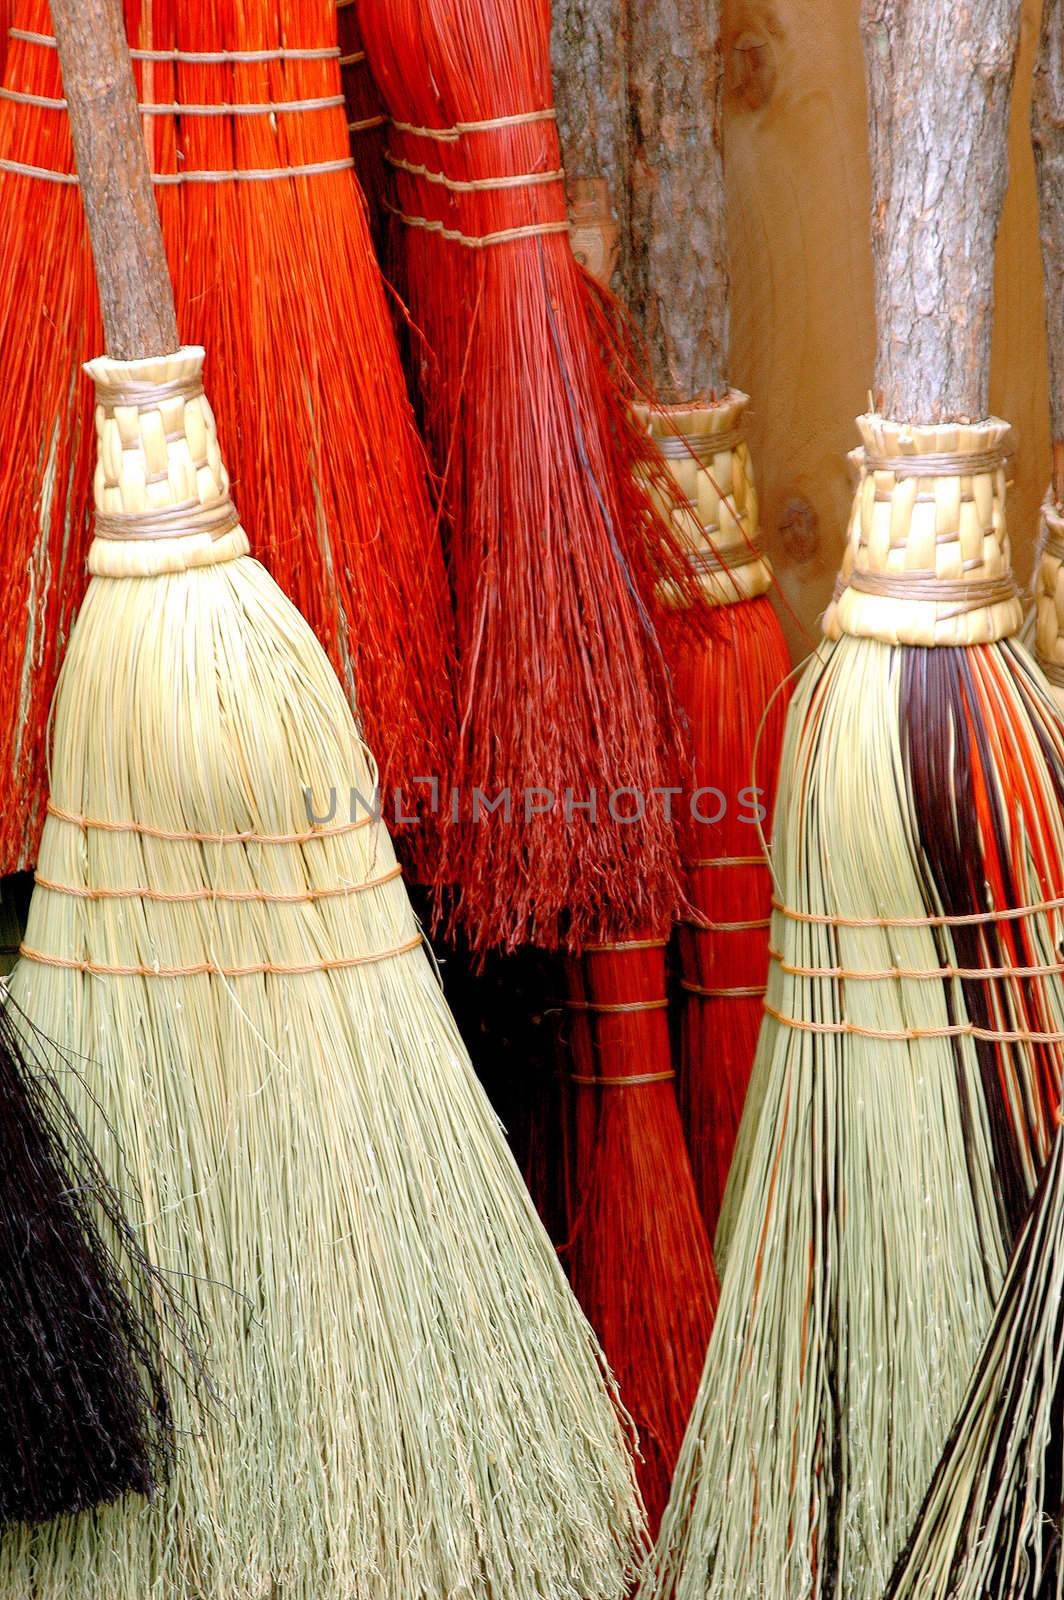 Colorful brooms. by oscarcwilliams